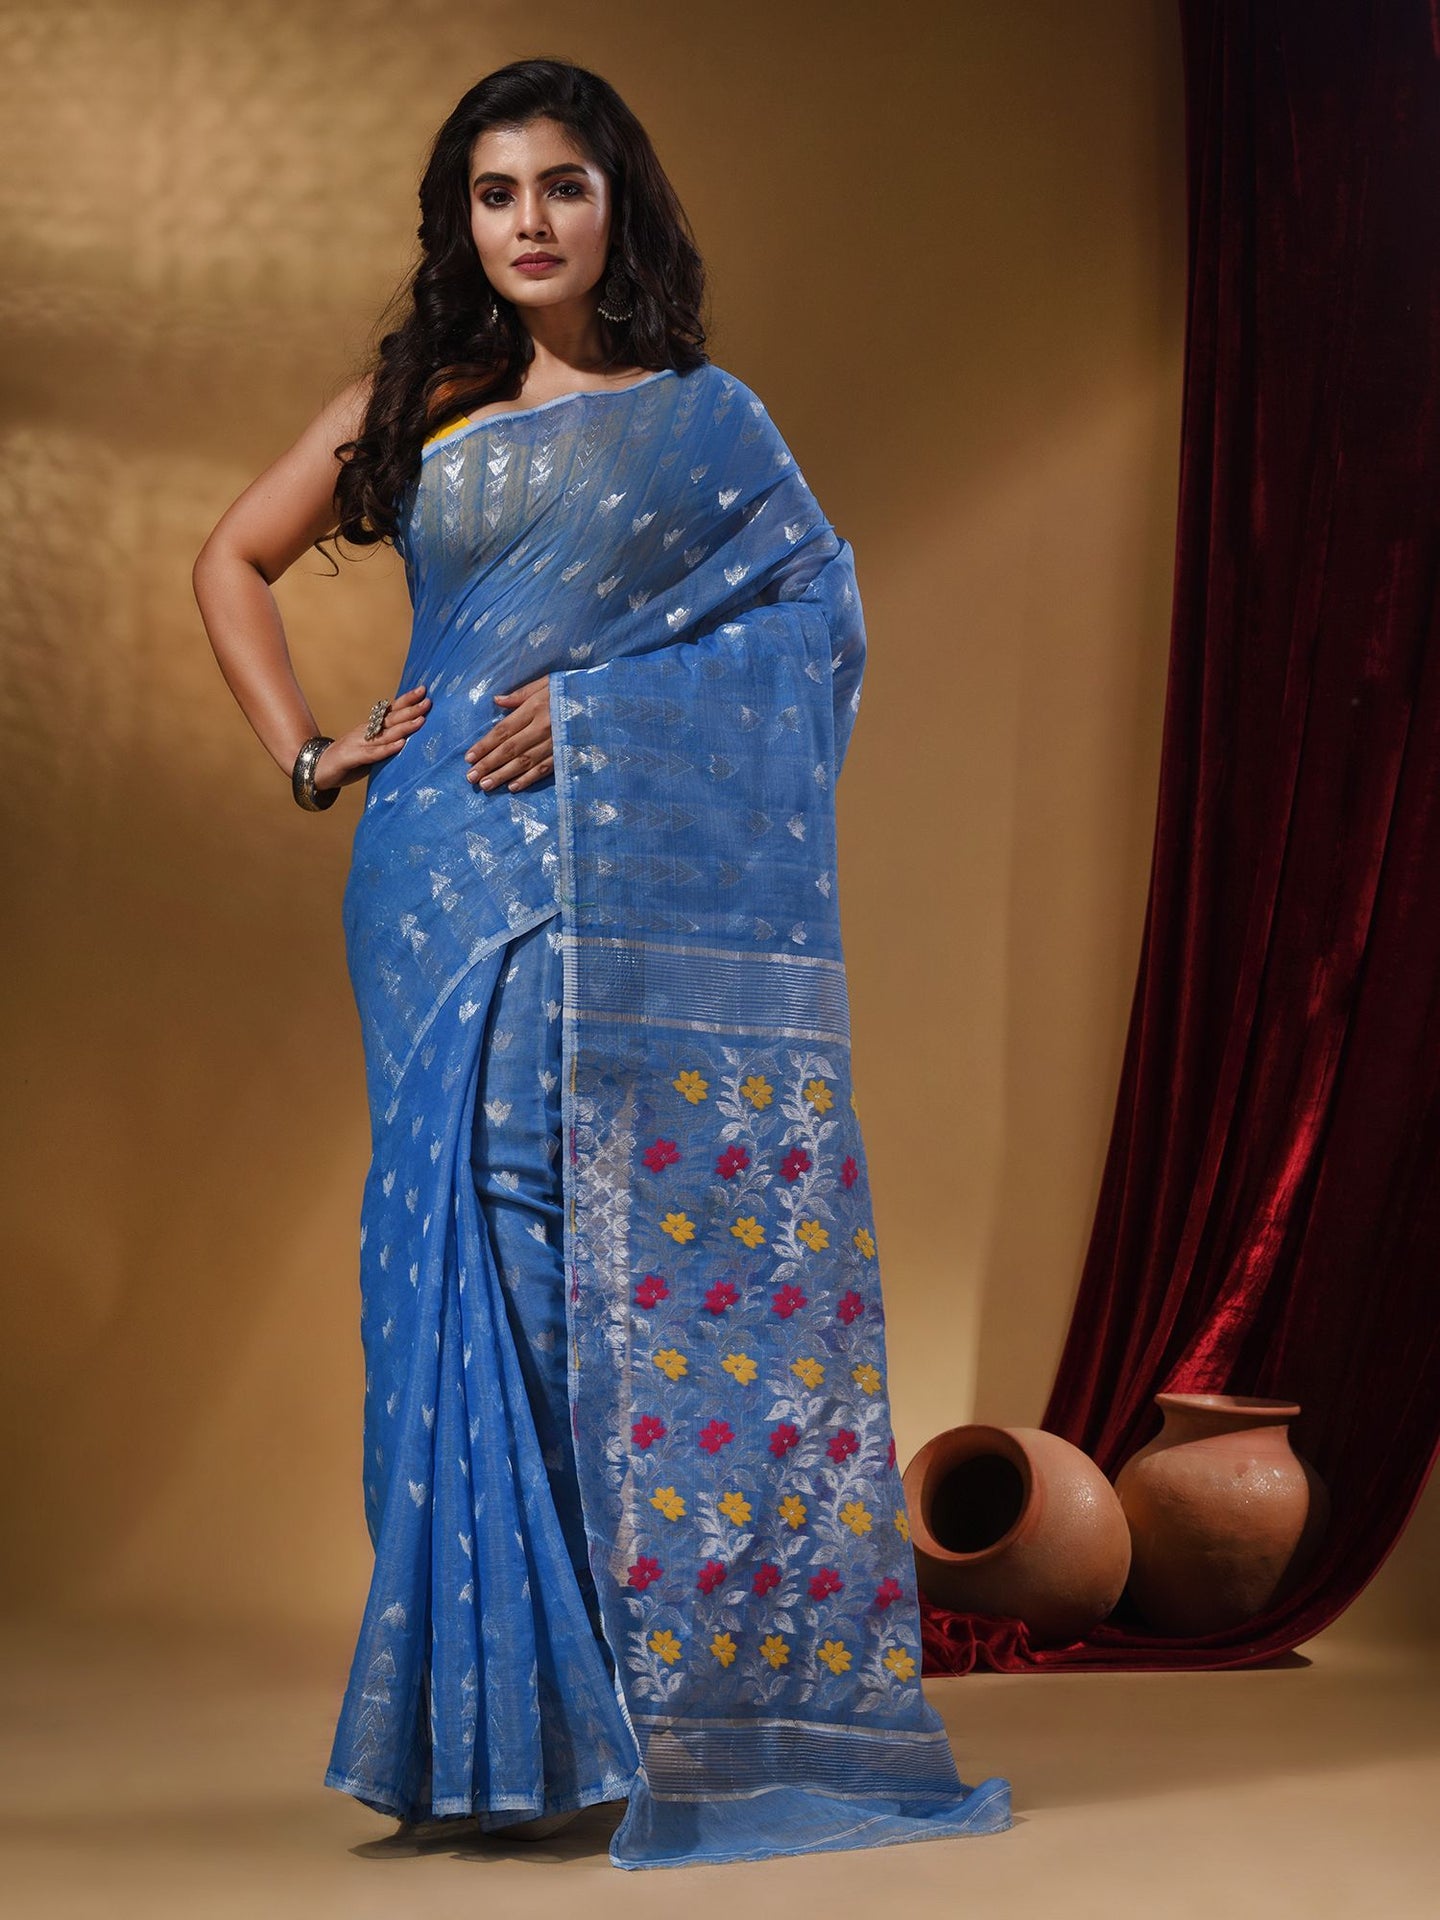 Sky Blue Cotton Handwoven Jamdani Saree With Geometric Designs and Floral Patterns